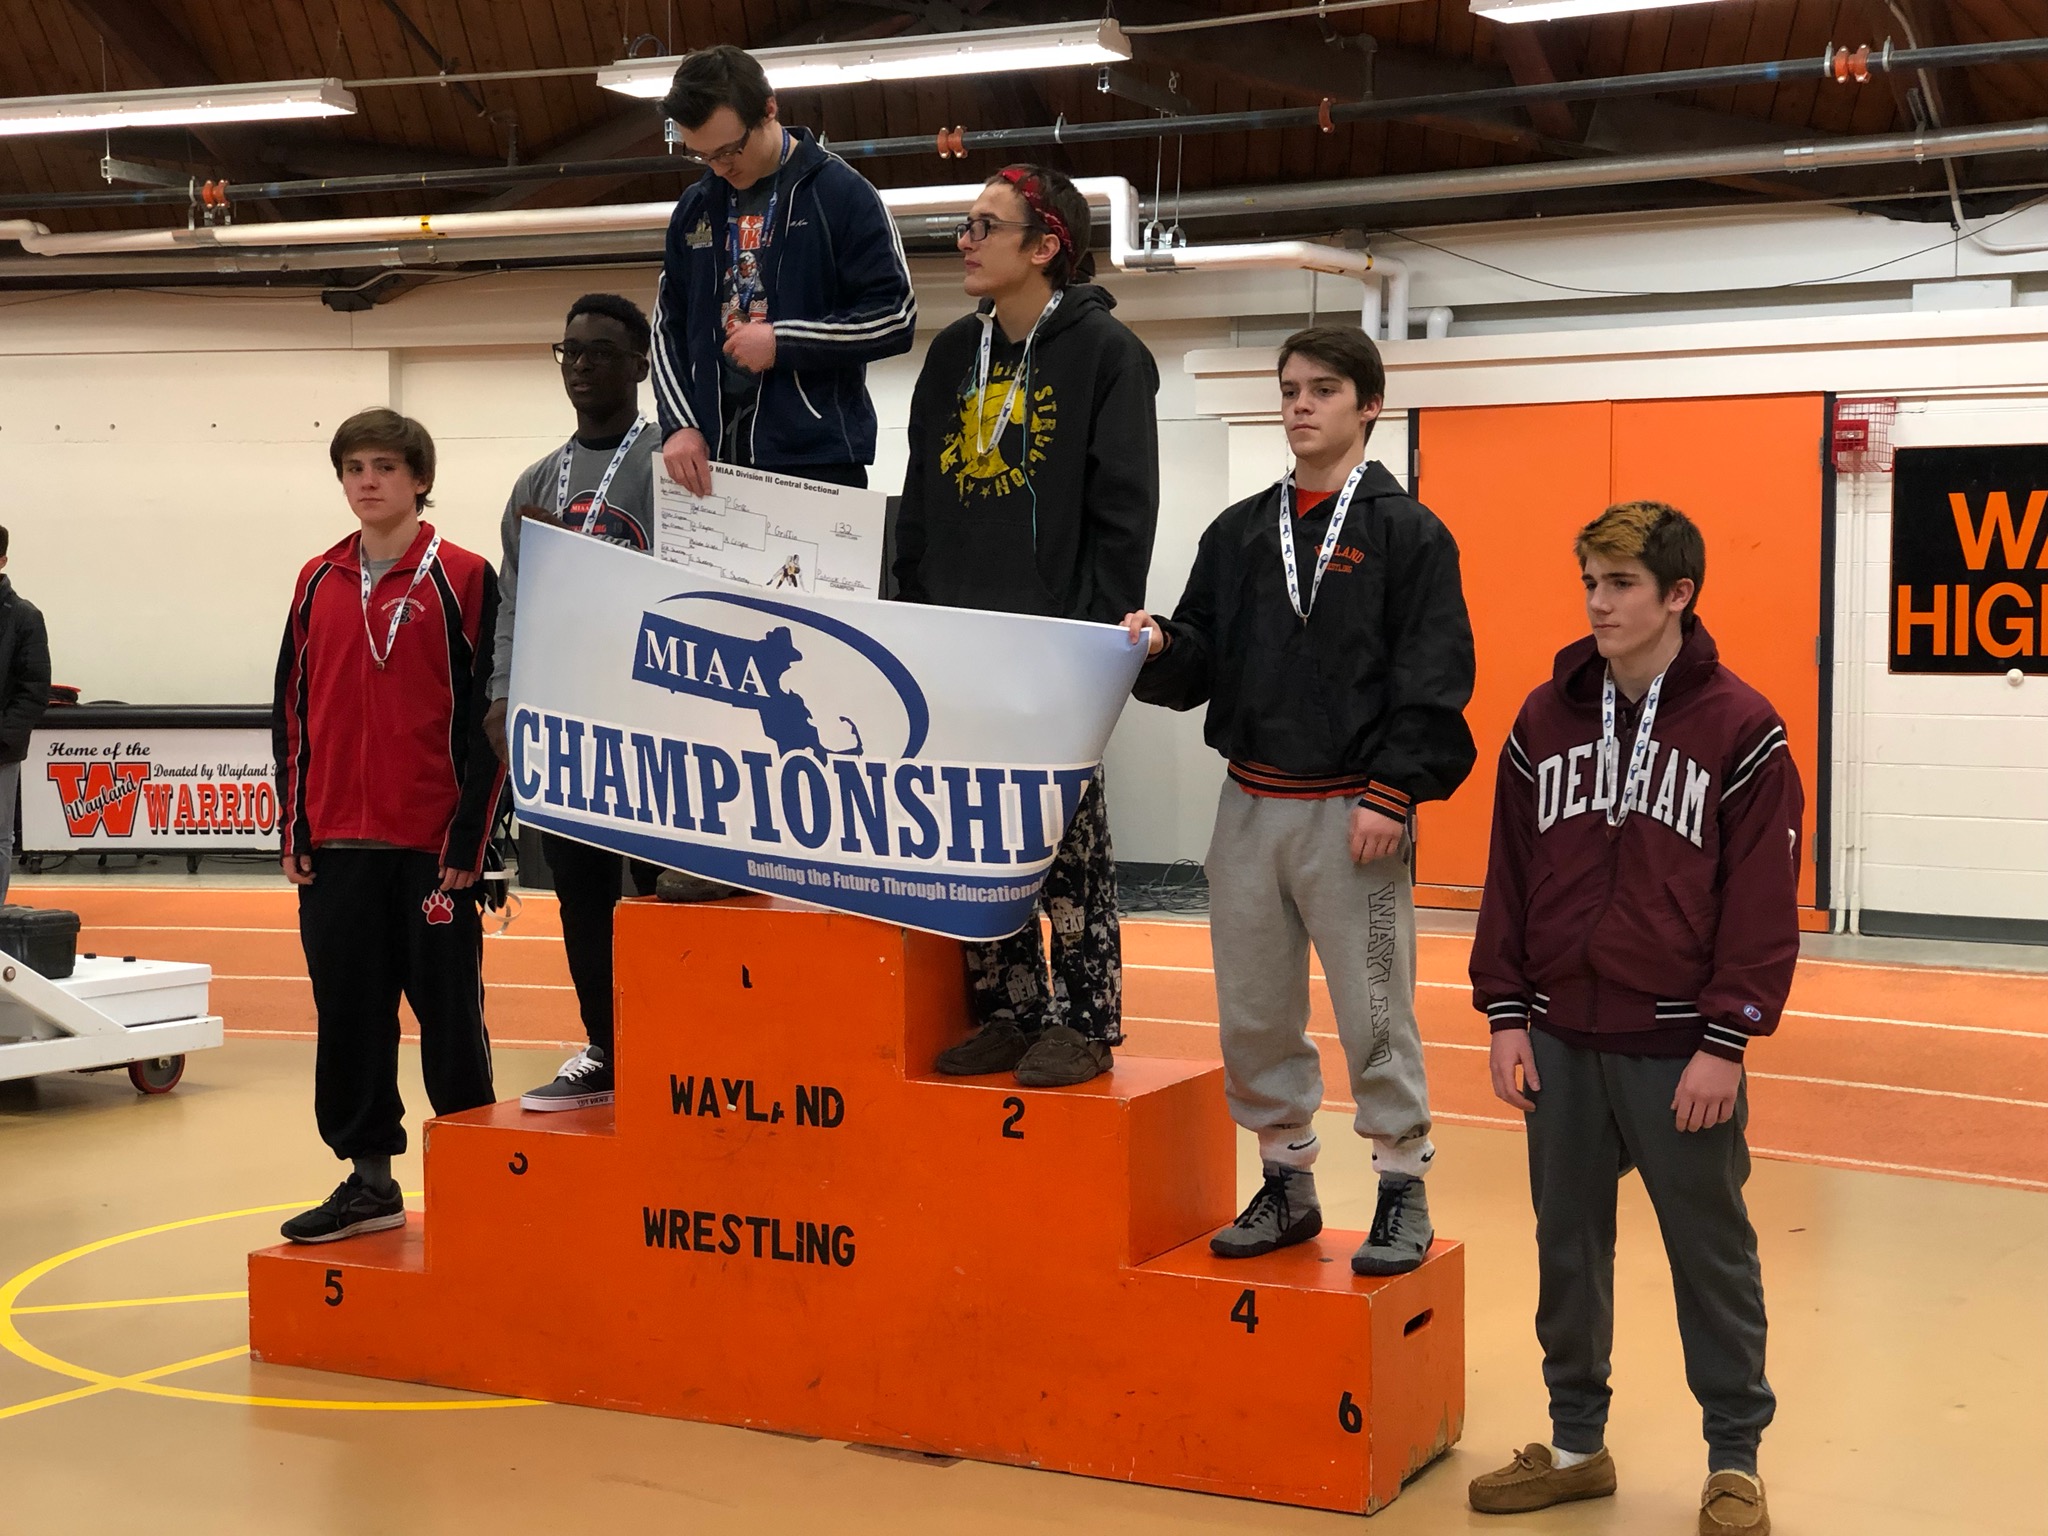 Malcolm Chrispin (Boston Latin Academy) places 3rd at the MIAA Division 3 Central Championships, becoming the first-ever state qualifier for his school.